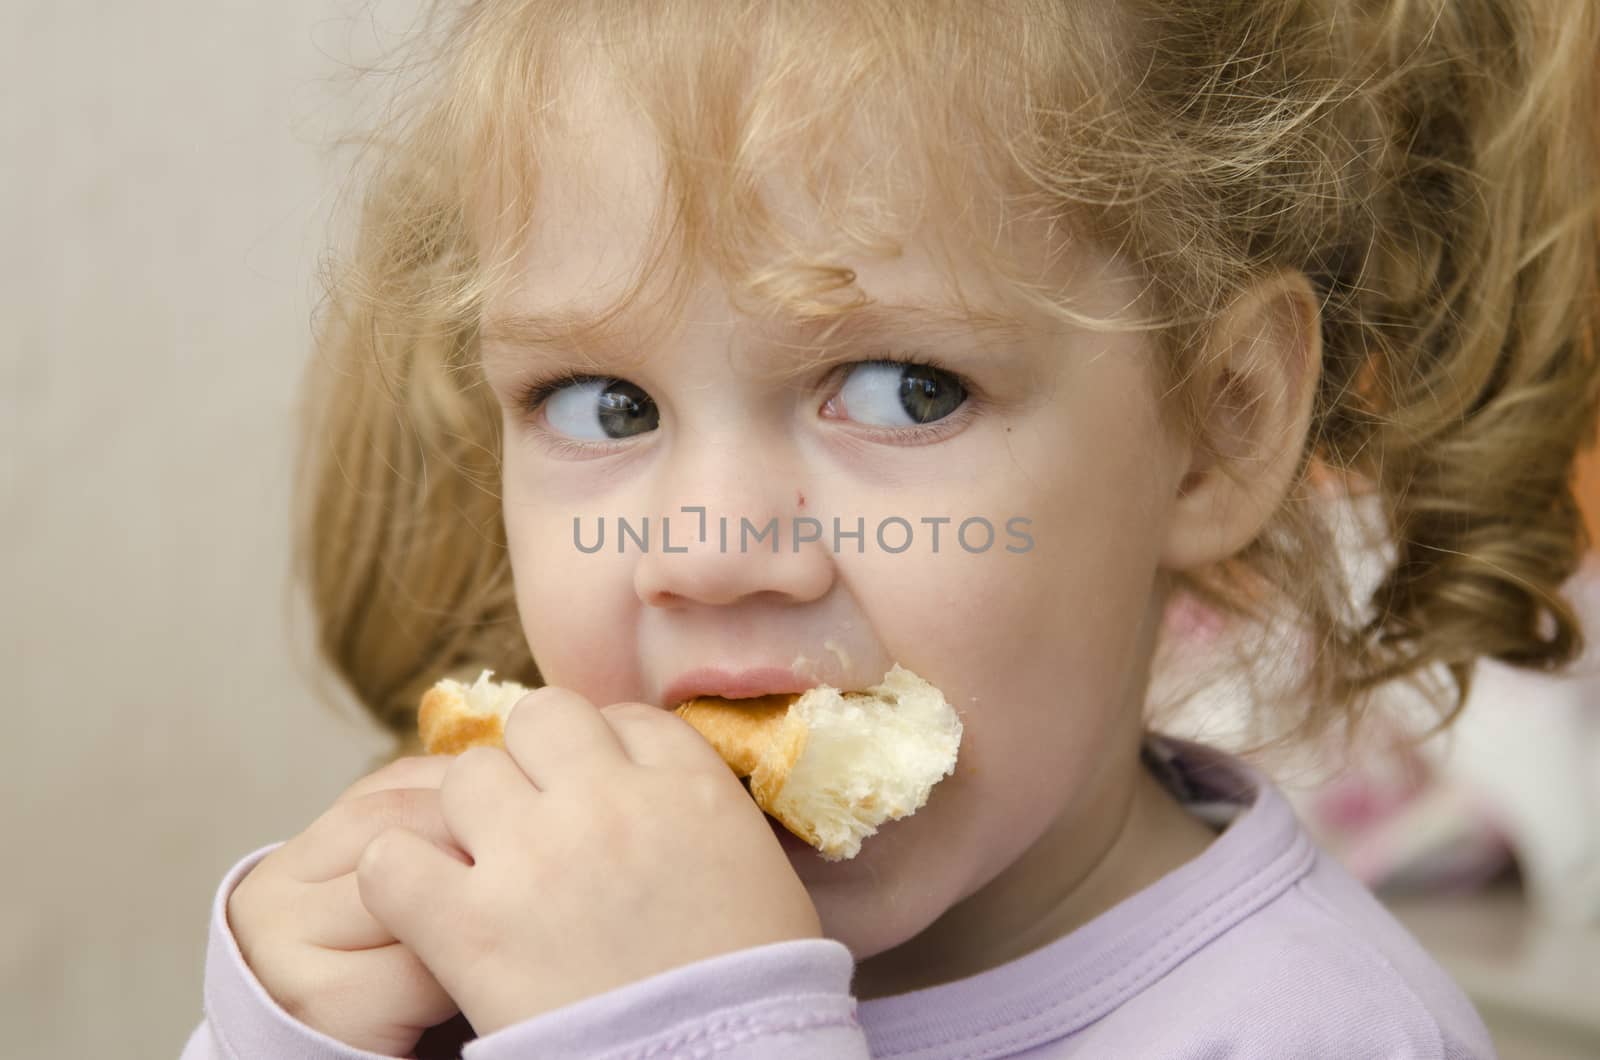 The little girl sits at a table and with enthusiasm eats a roll. Photo close up.